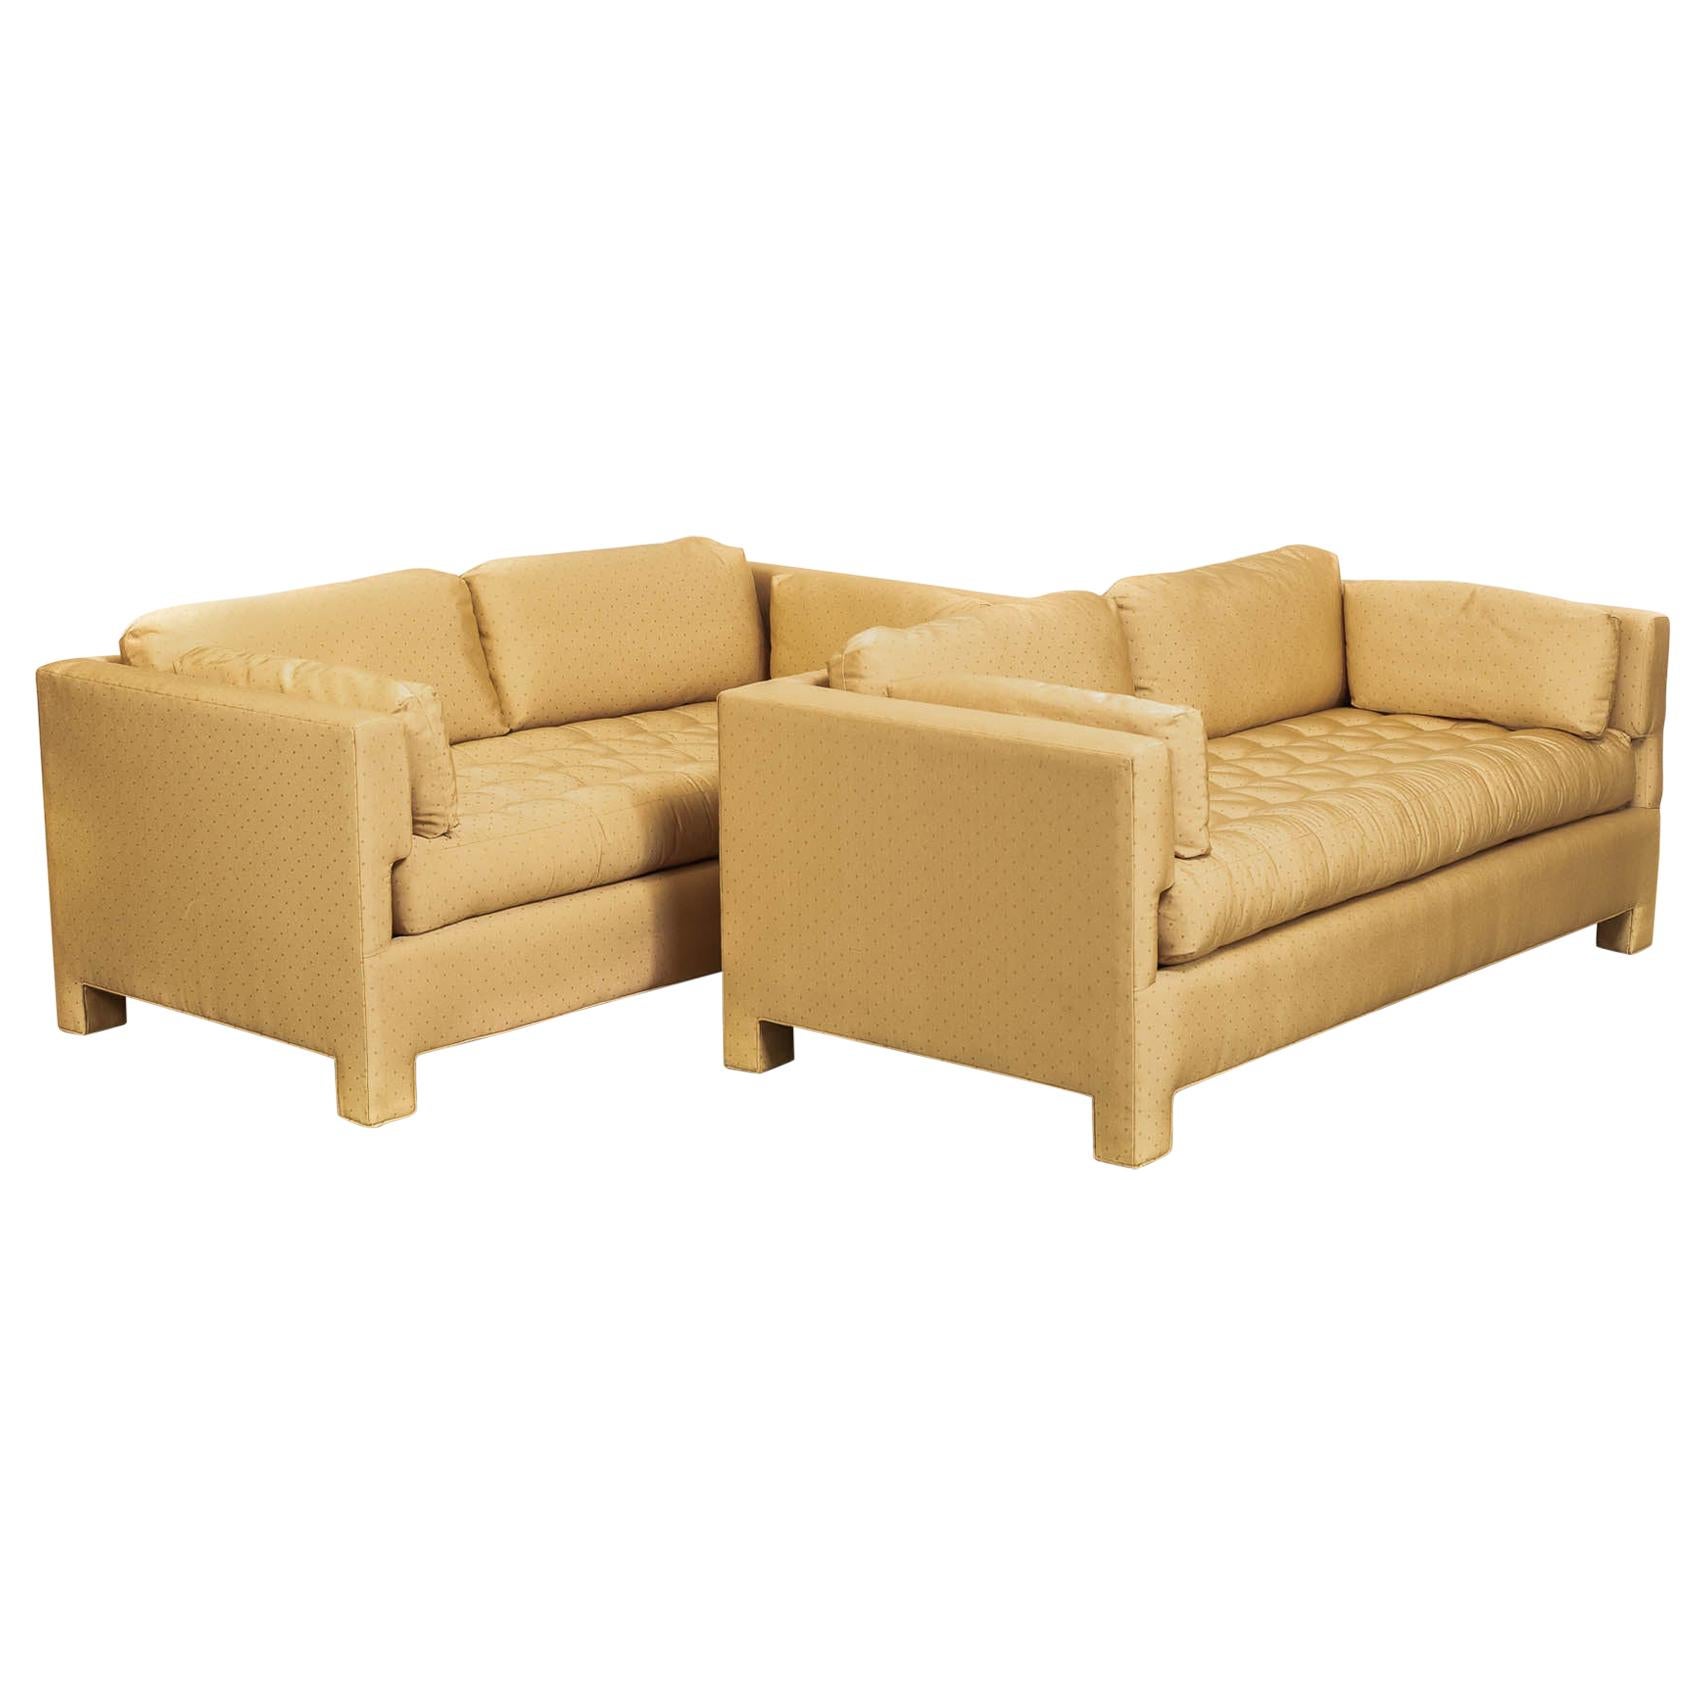 Midcentury Probber or Wormley Style Tan Upholstered Sofa Couches, a Pair